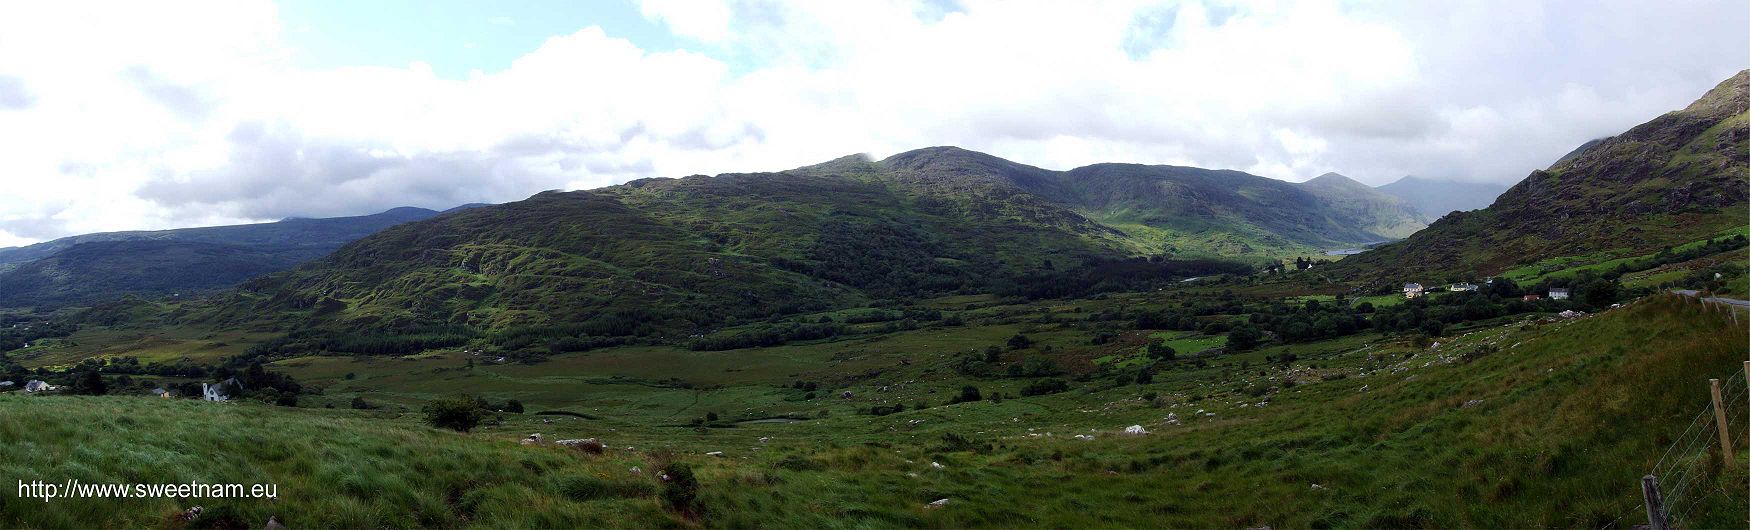 Panoramic photo of the Black Valley, Co. Kerry.